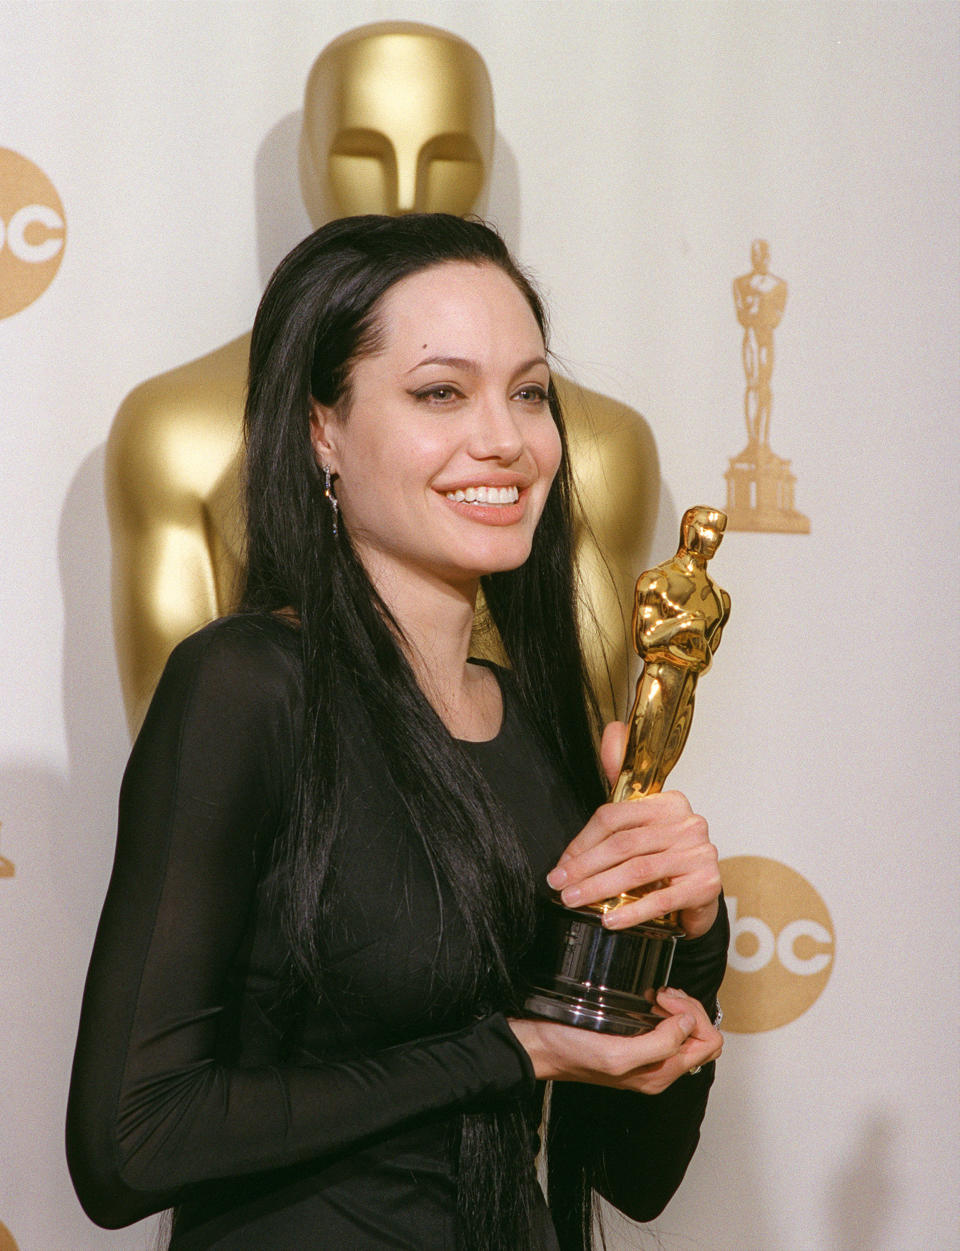 387049 13: Recipient of the Best Supporting Actress Award, Angelina Jolie, poses backstage at the 72nd Annual Academy Awards March 26, 2000 in Los Angeles. (Photo HO/AMPAS)